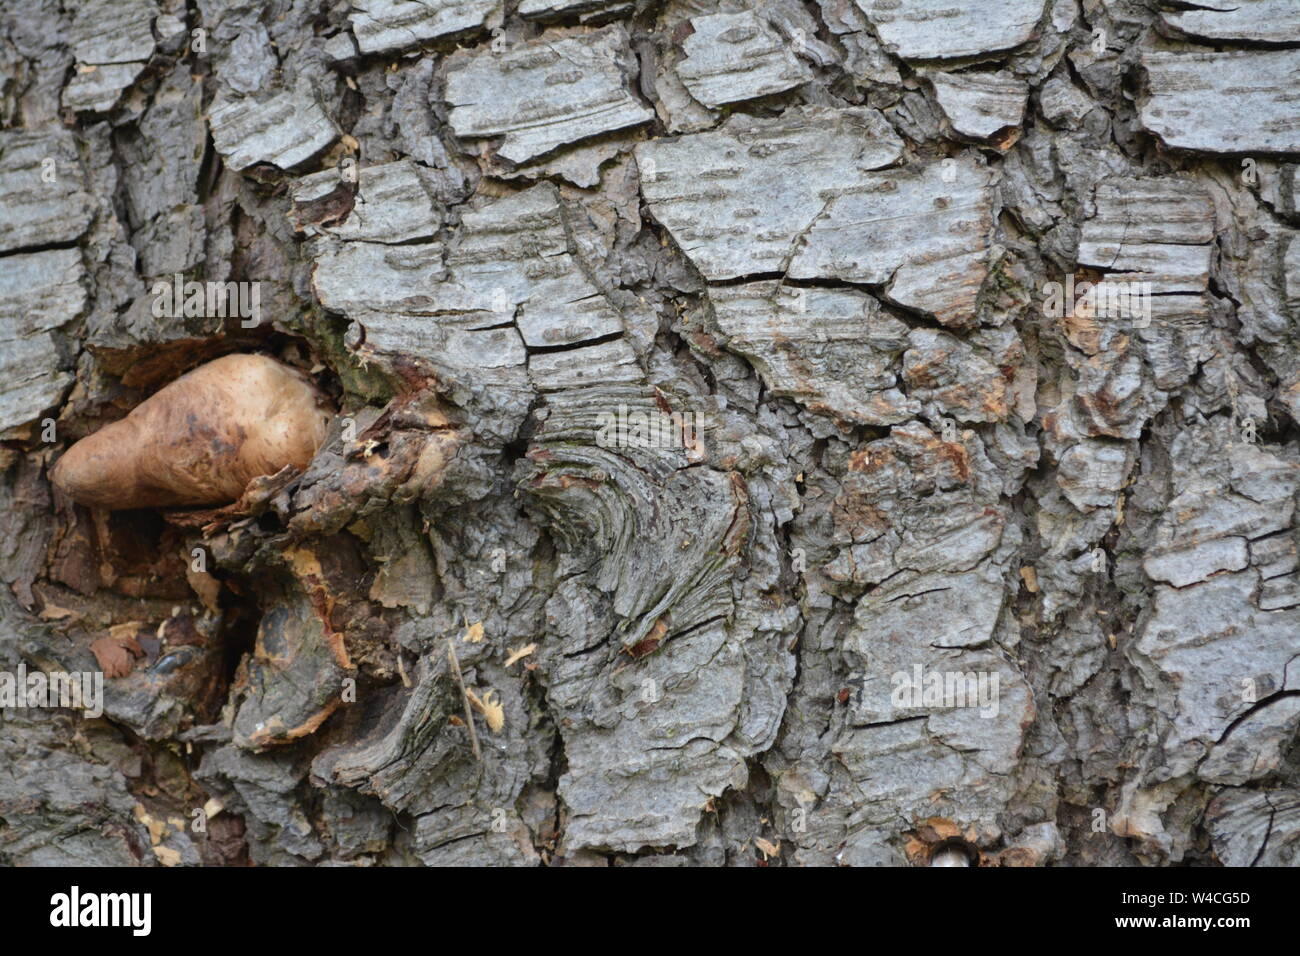 Close up of a large piece of wood timber bark showing random patterning and unusual protrusion re nature and growth Stock Photo